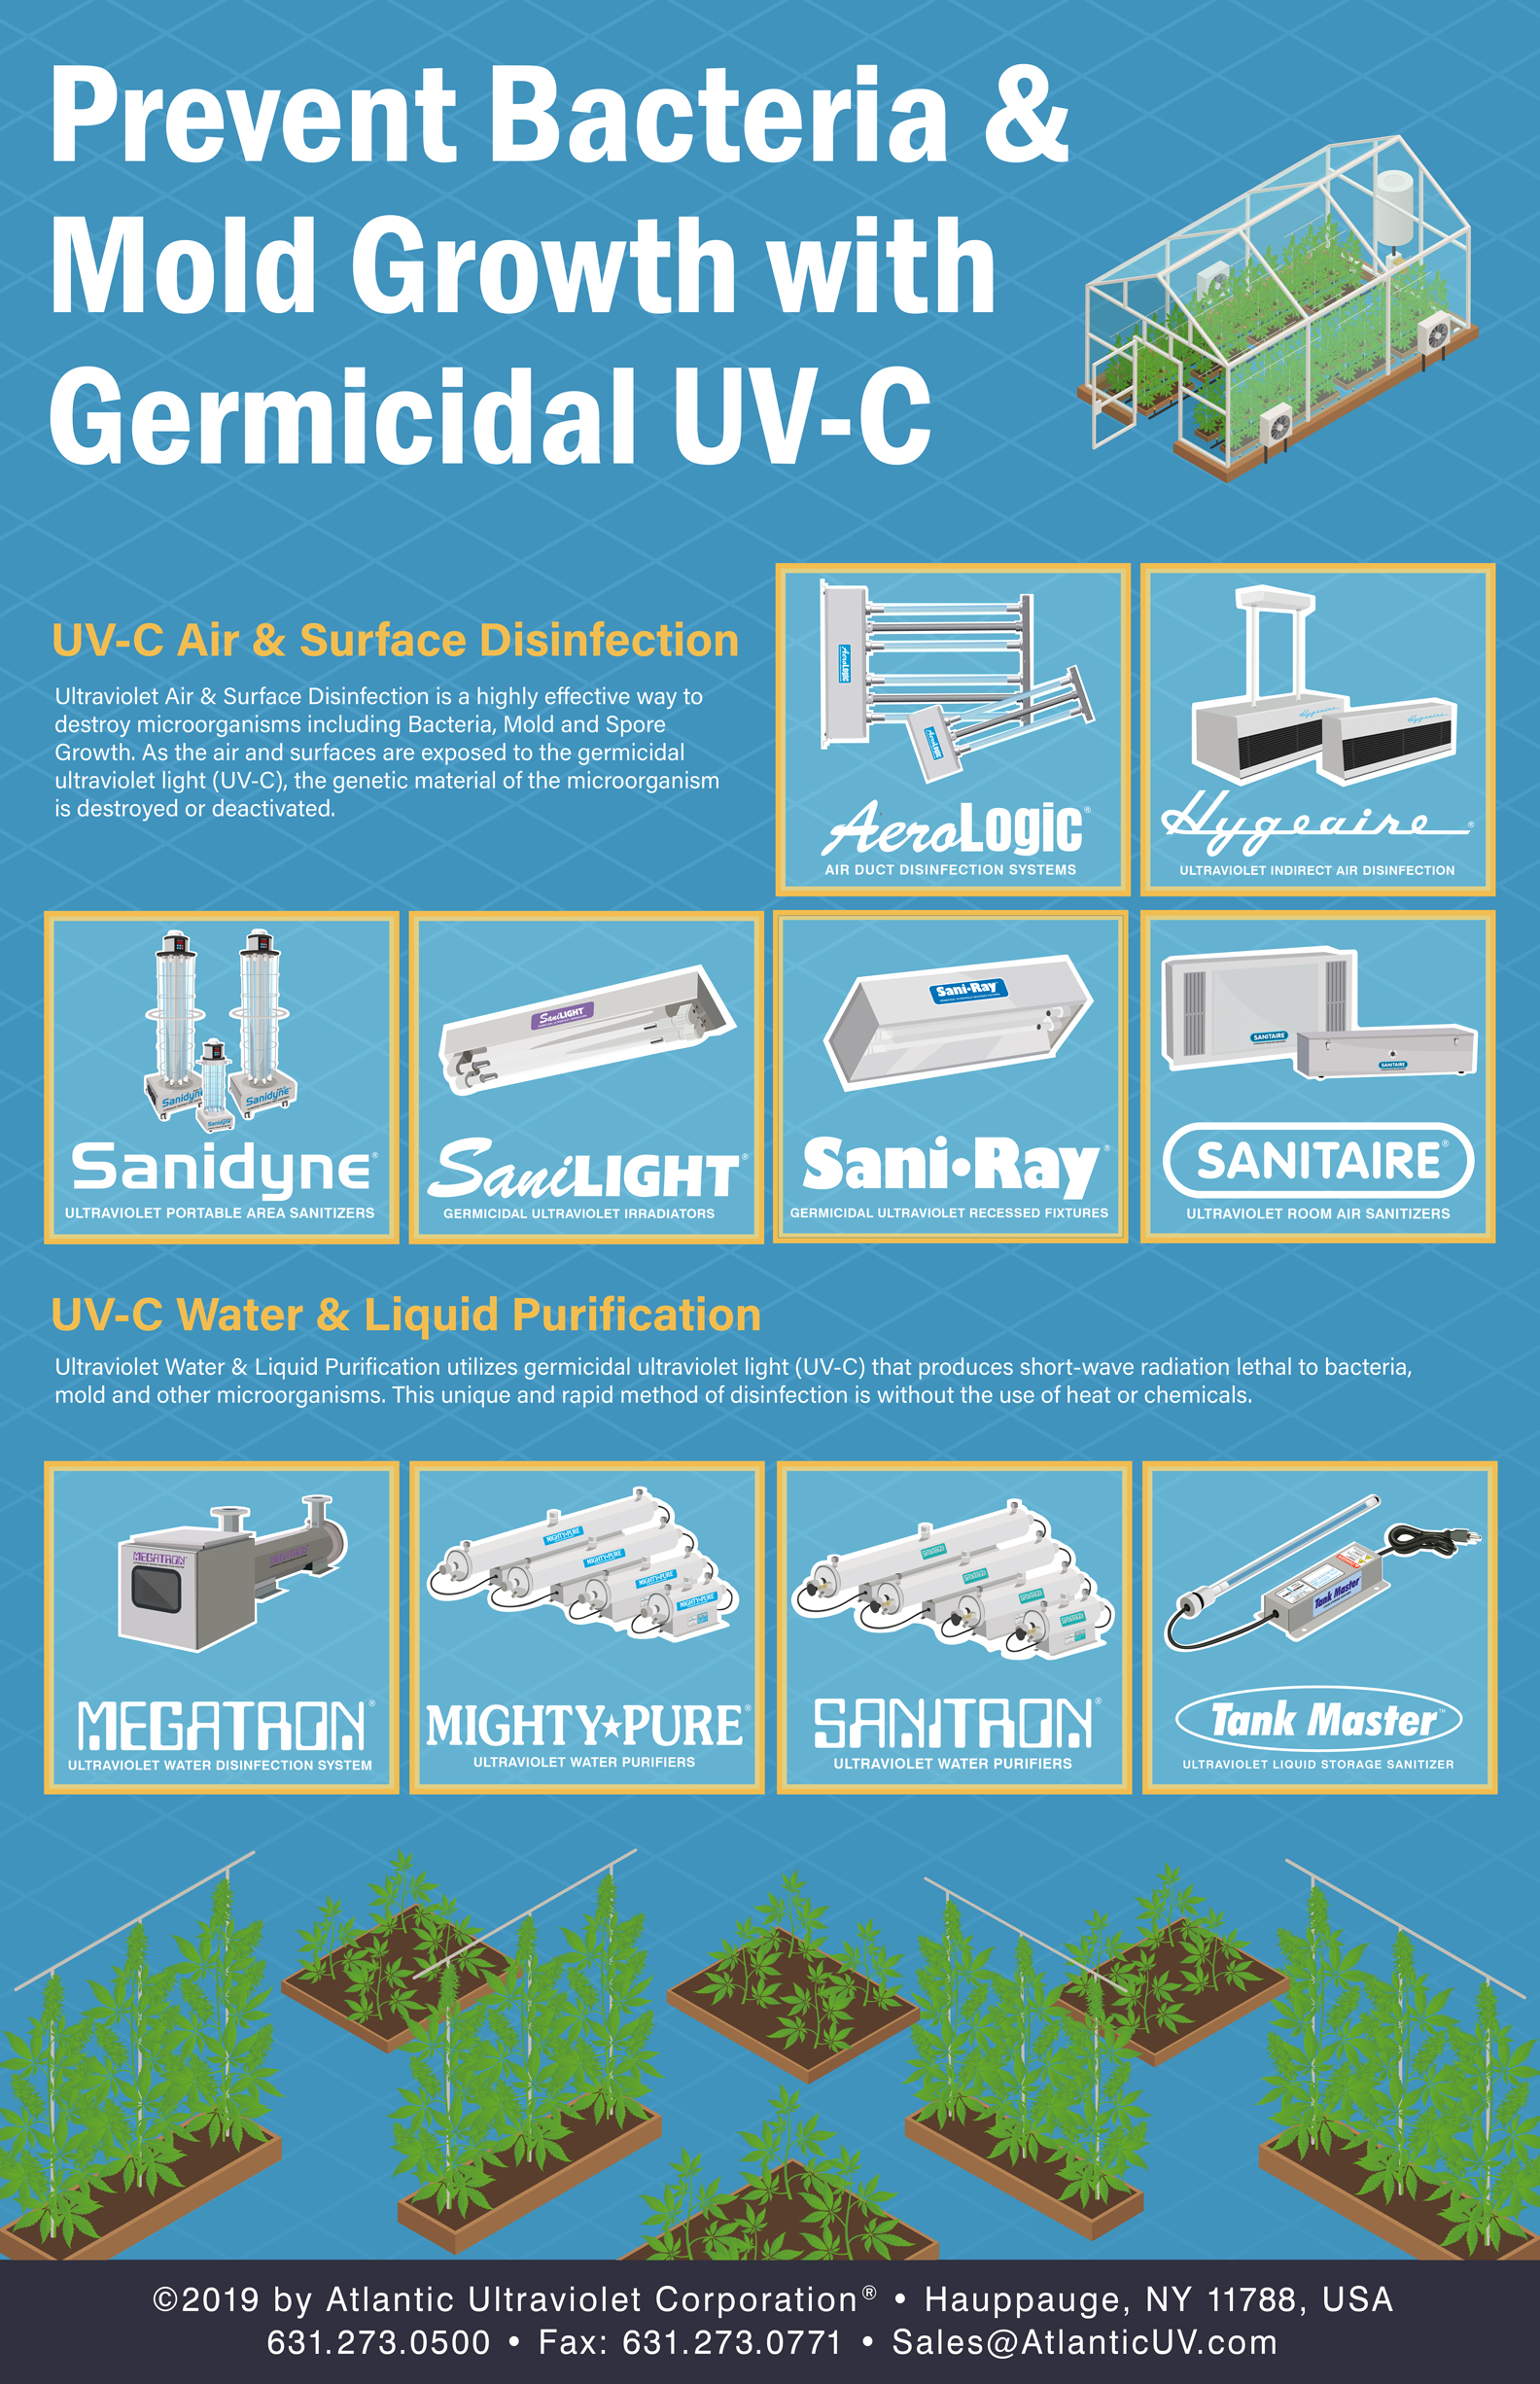 Visual: Our UV-C Disinfection & Purification Products Can Help Prevent Bacteria & Mold Growth